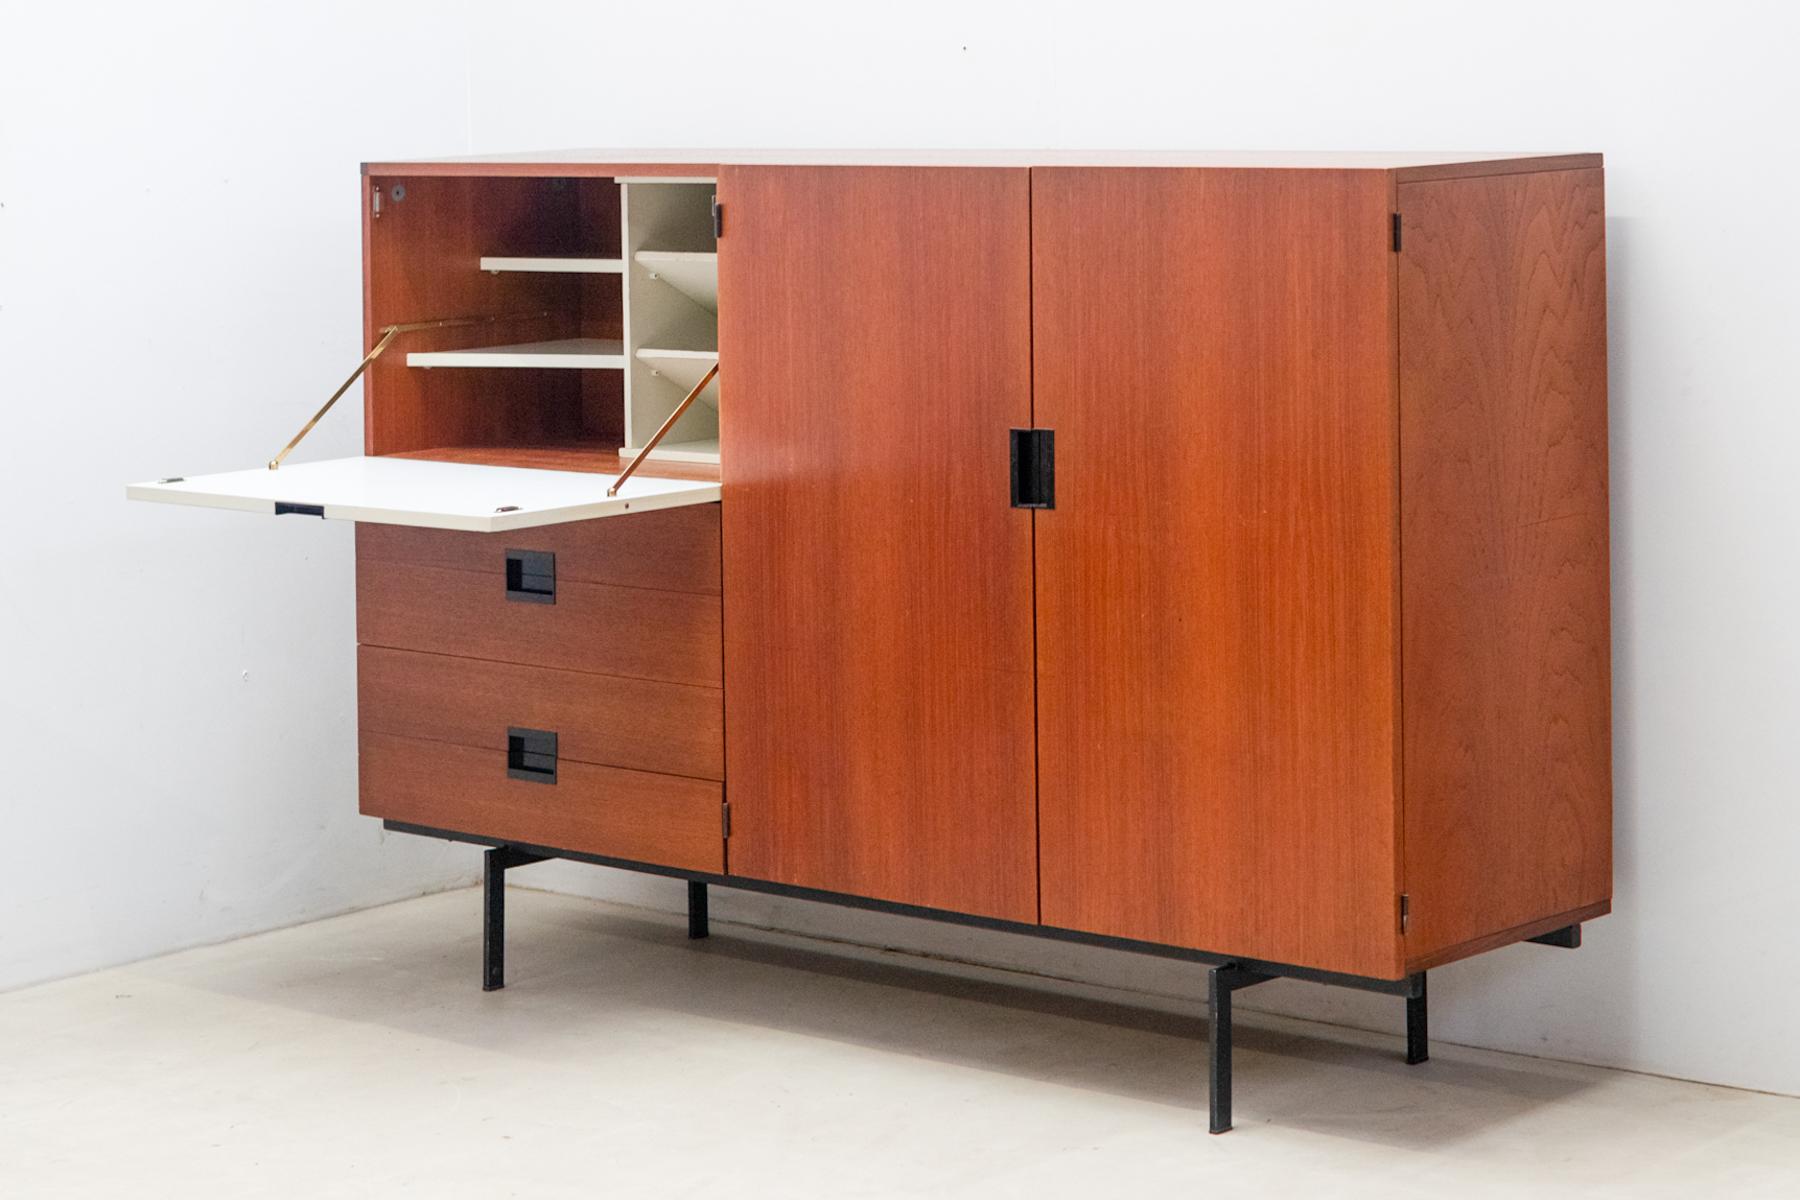 The highboard CU08, designed by Cees Braakman for Pastoe in 1958, is crafted from teak wood with a white lacquered folding door. 
It includes also four drawers below and two doors on the right. 
Part of the Japanese series by Cees Braakman, this